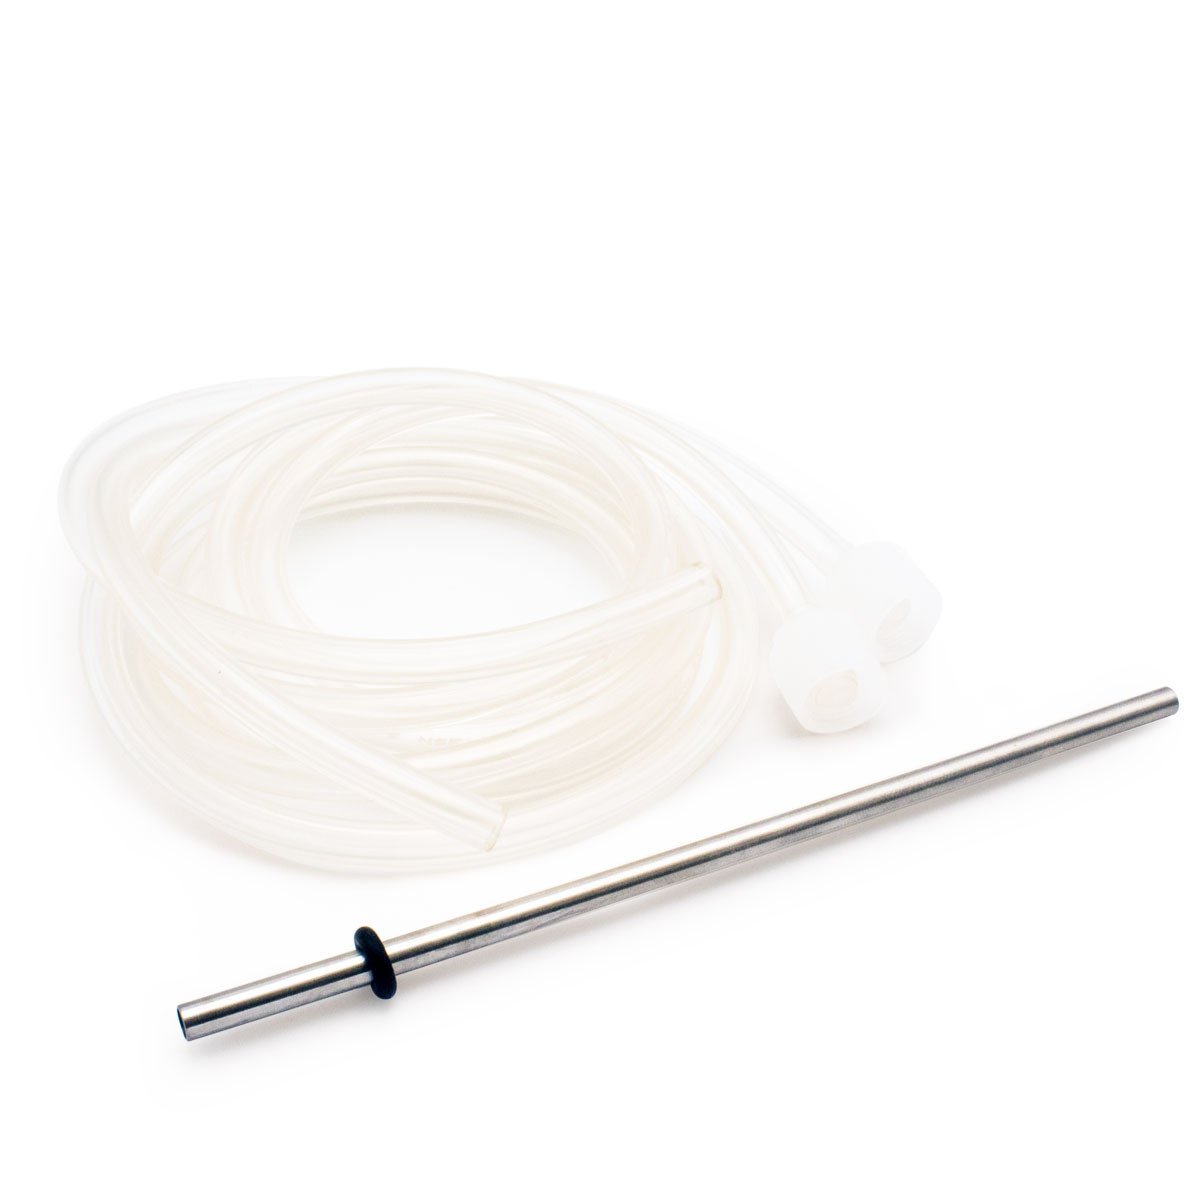 Peristaltic Pump Complete Tubing Set with SS Aspiration Tube for HI921